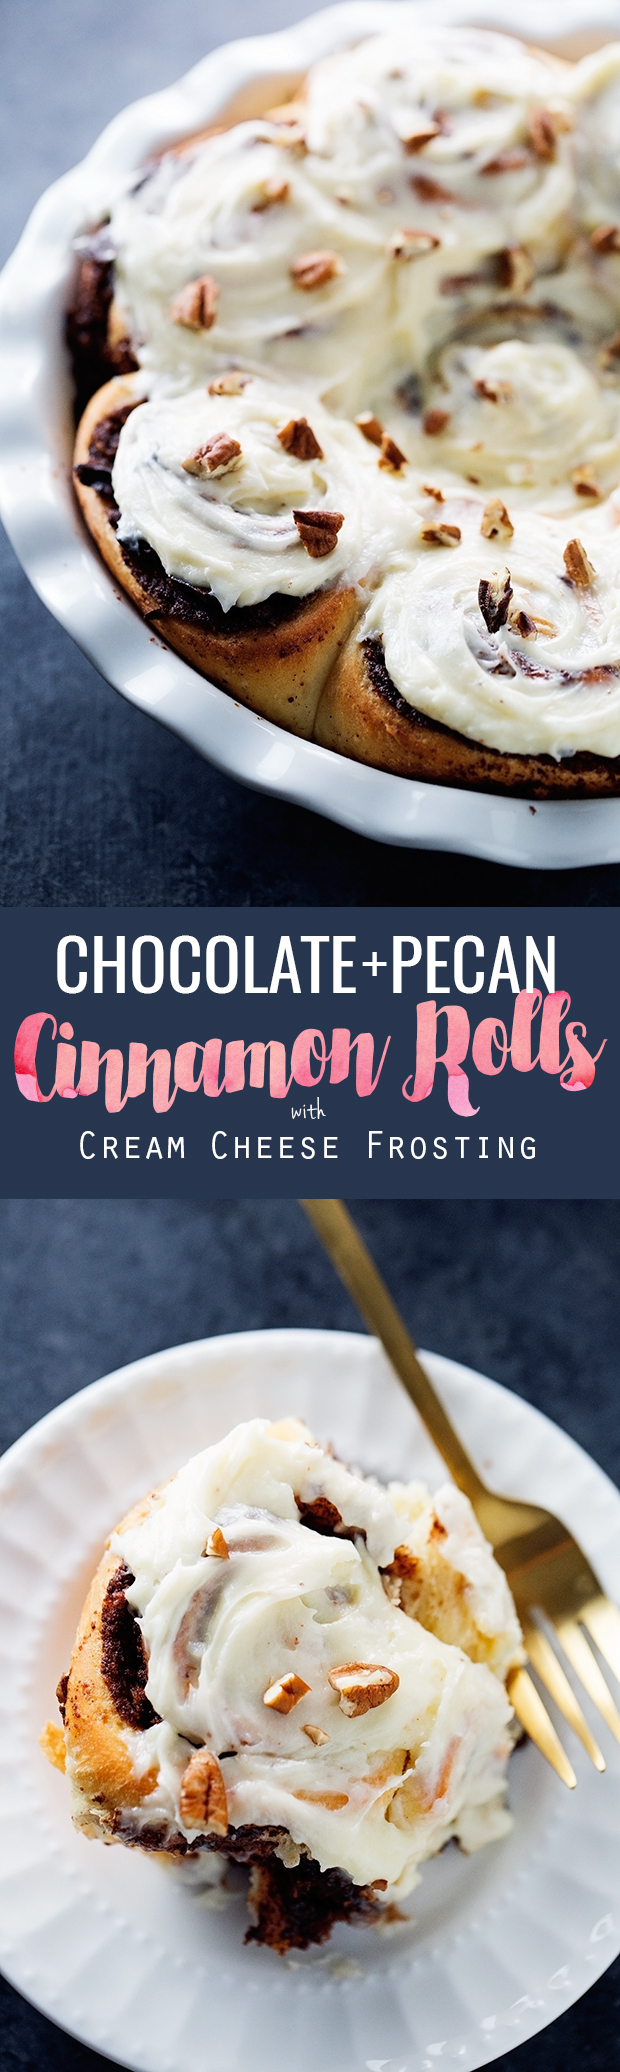 One Hour Chocolate Pecan Cinnamon Rolls - topped with a cream cheese frosting - these are better than Cinnabon! #onehourcinnamonrolls #cinnamonrolls #creamcheesefrosting | Littlespicejar.com